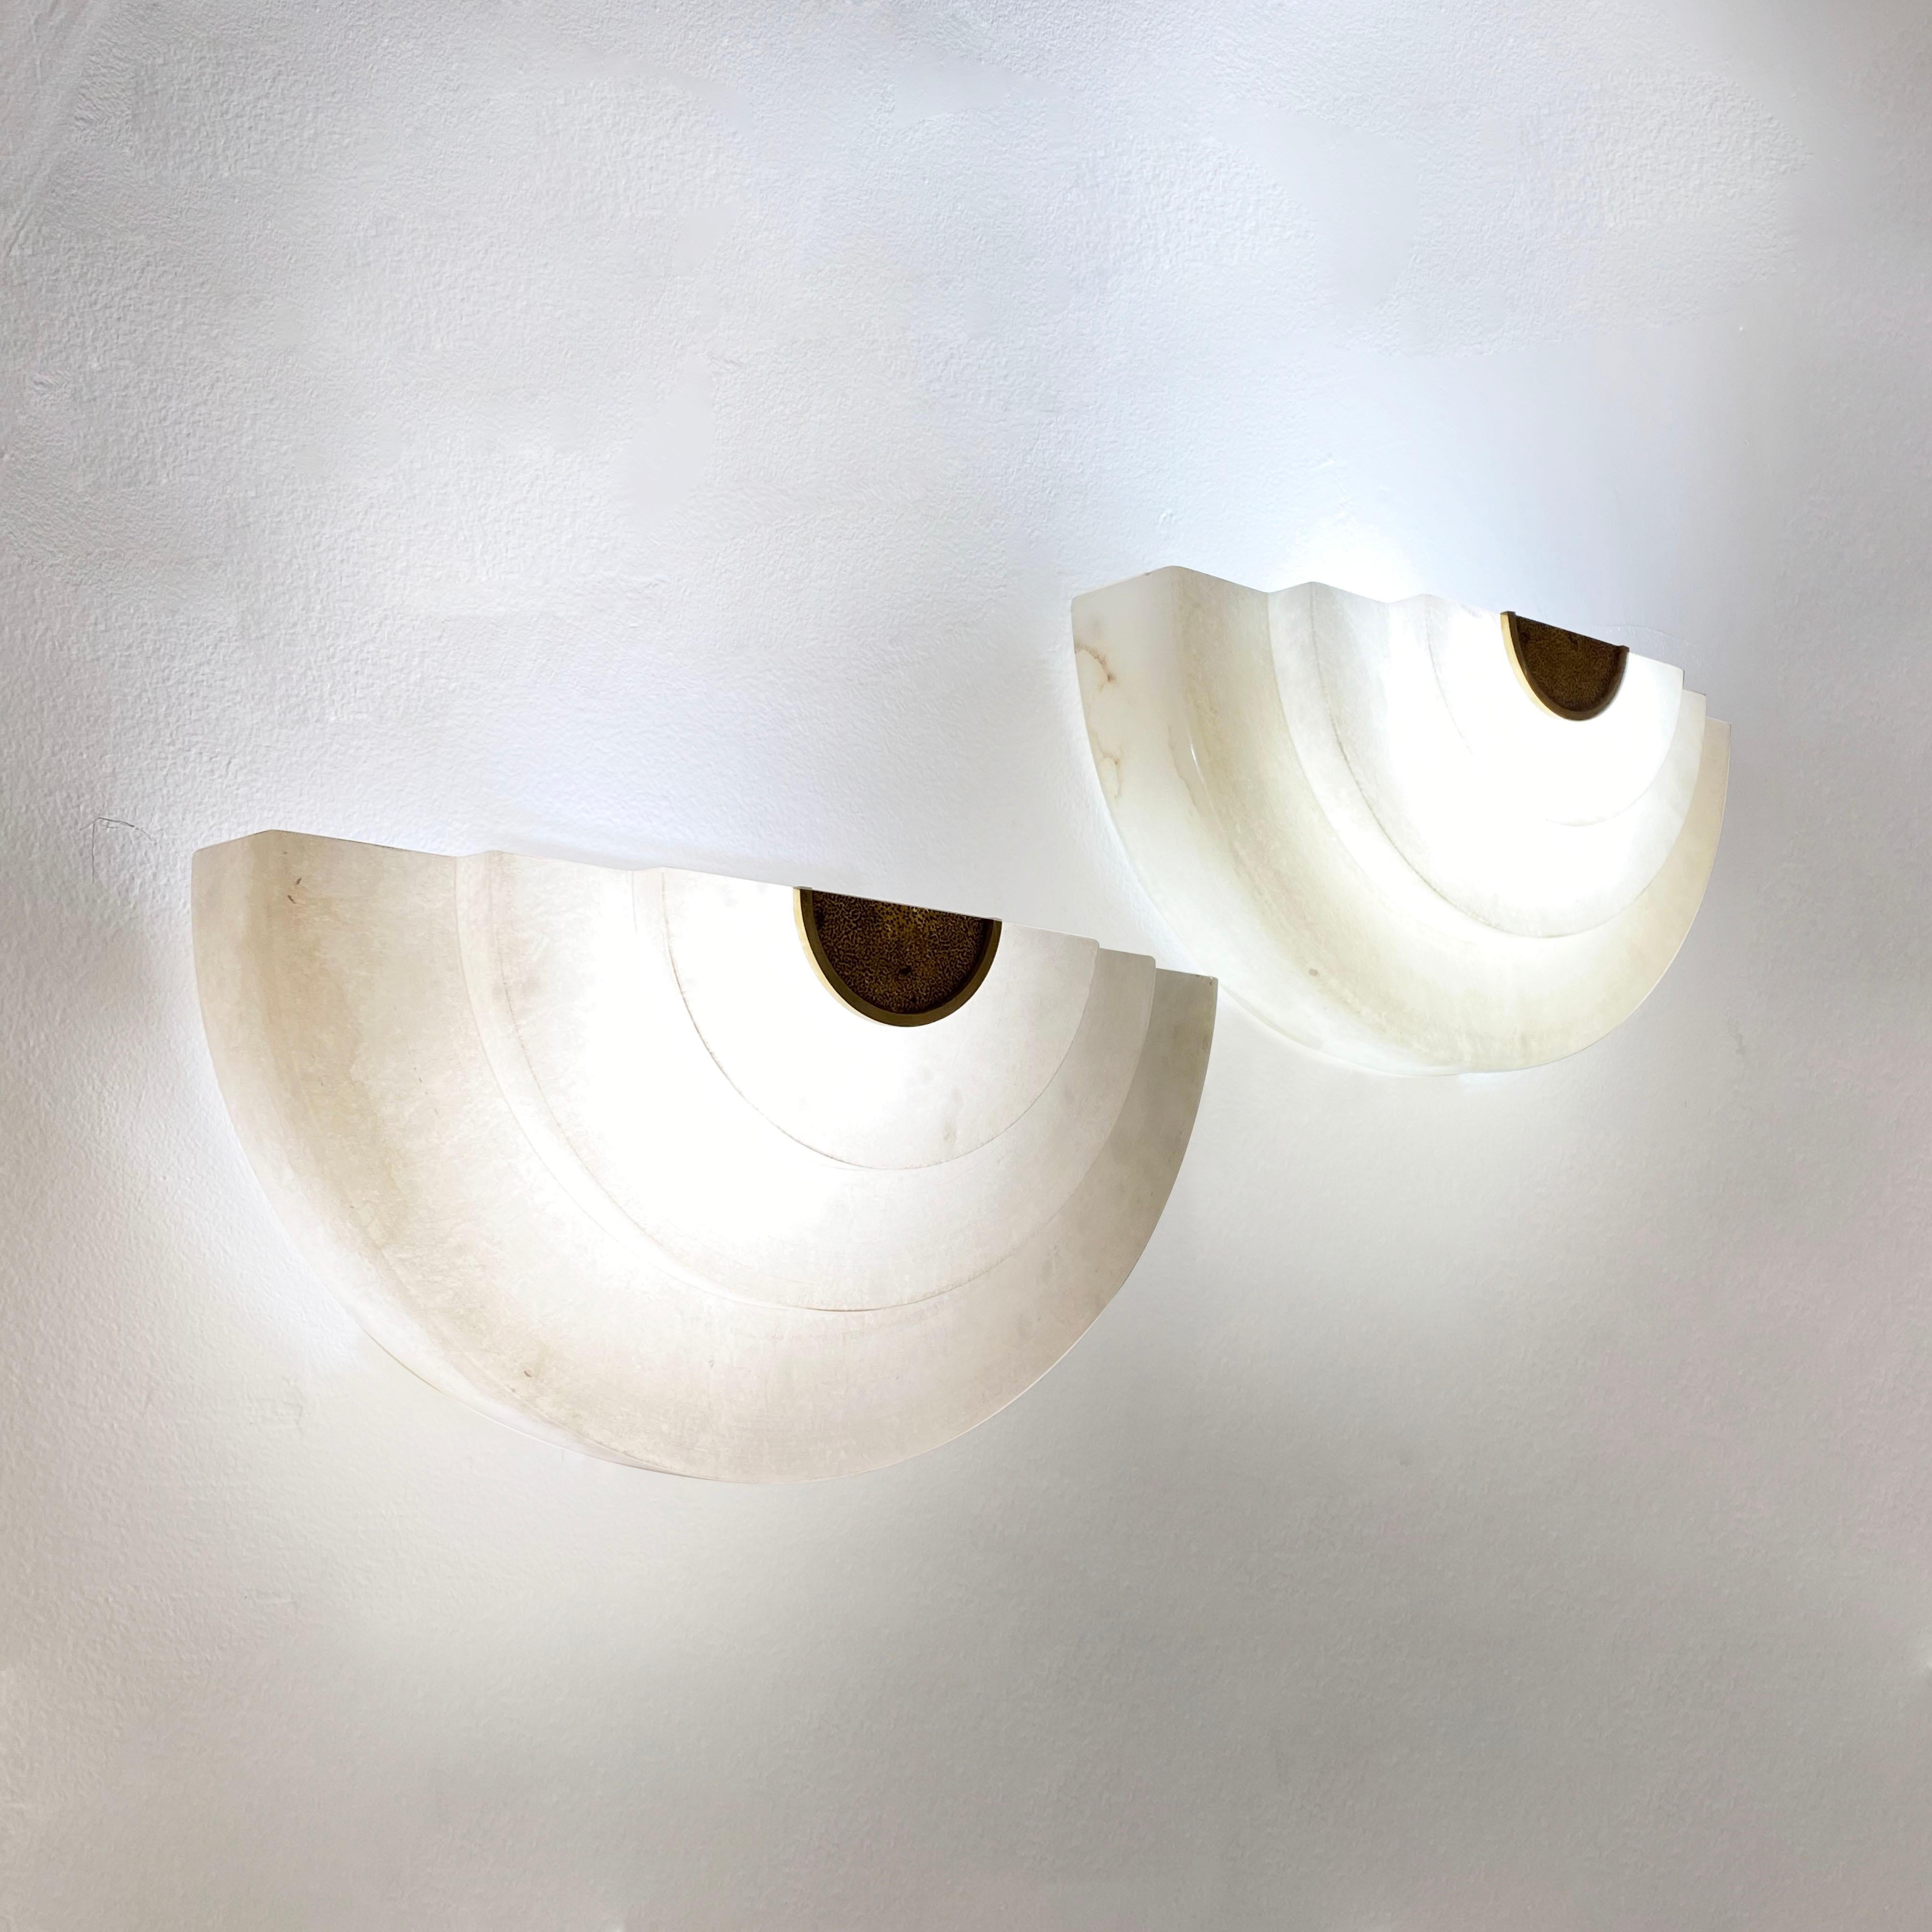 Iconic Art Deco is still here! This contemporary pair of sconces, entirely handcrafted in Spain, has a typical streamlined Art Deco design and reflects the era in all the details: the stepped half-moon organic shape, the use of material with the